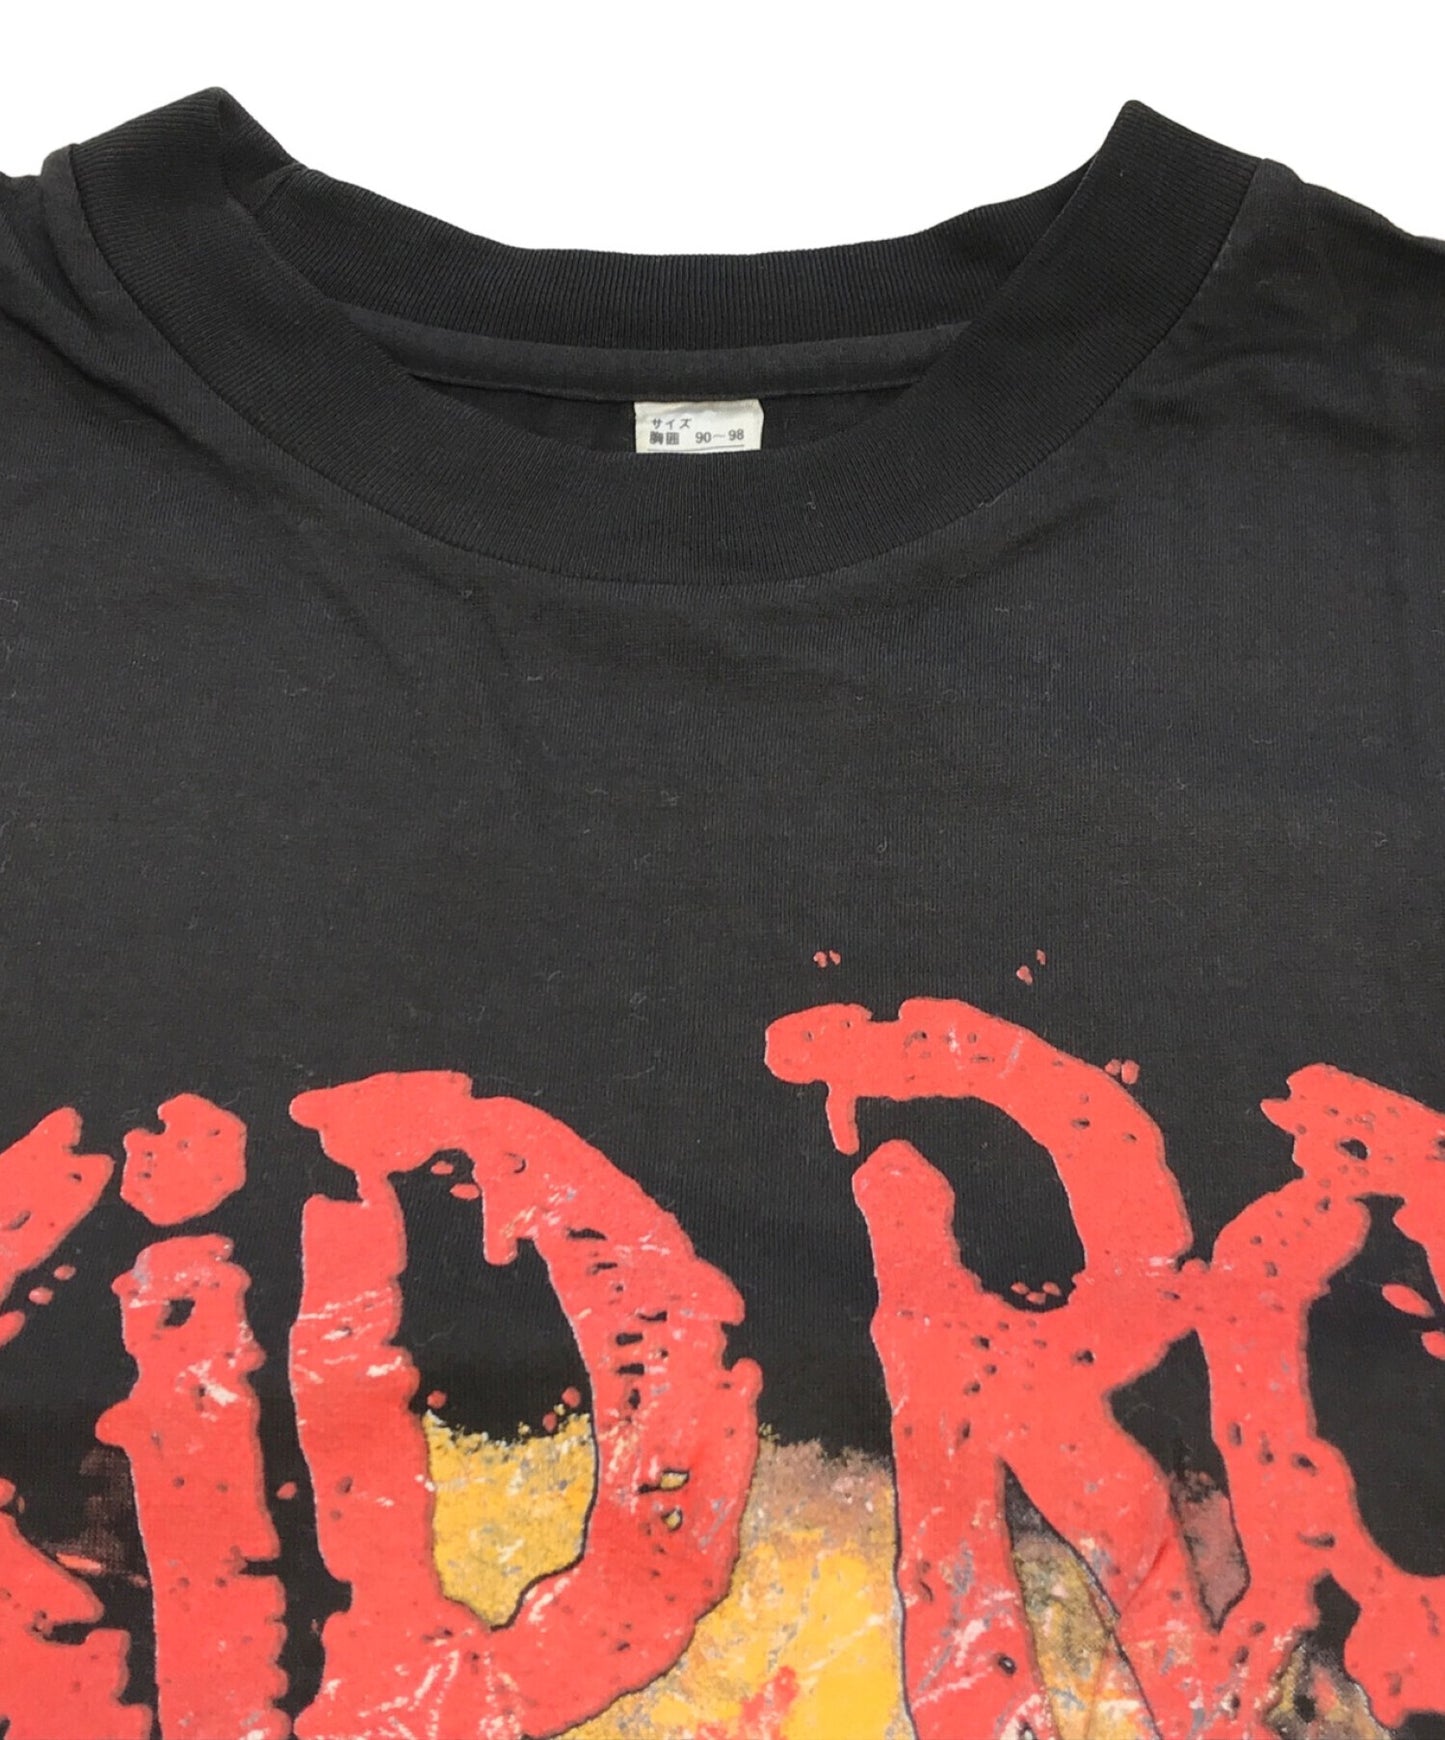 [Pre-owned] SKID ROW Band T-shirt